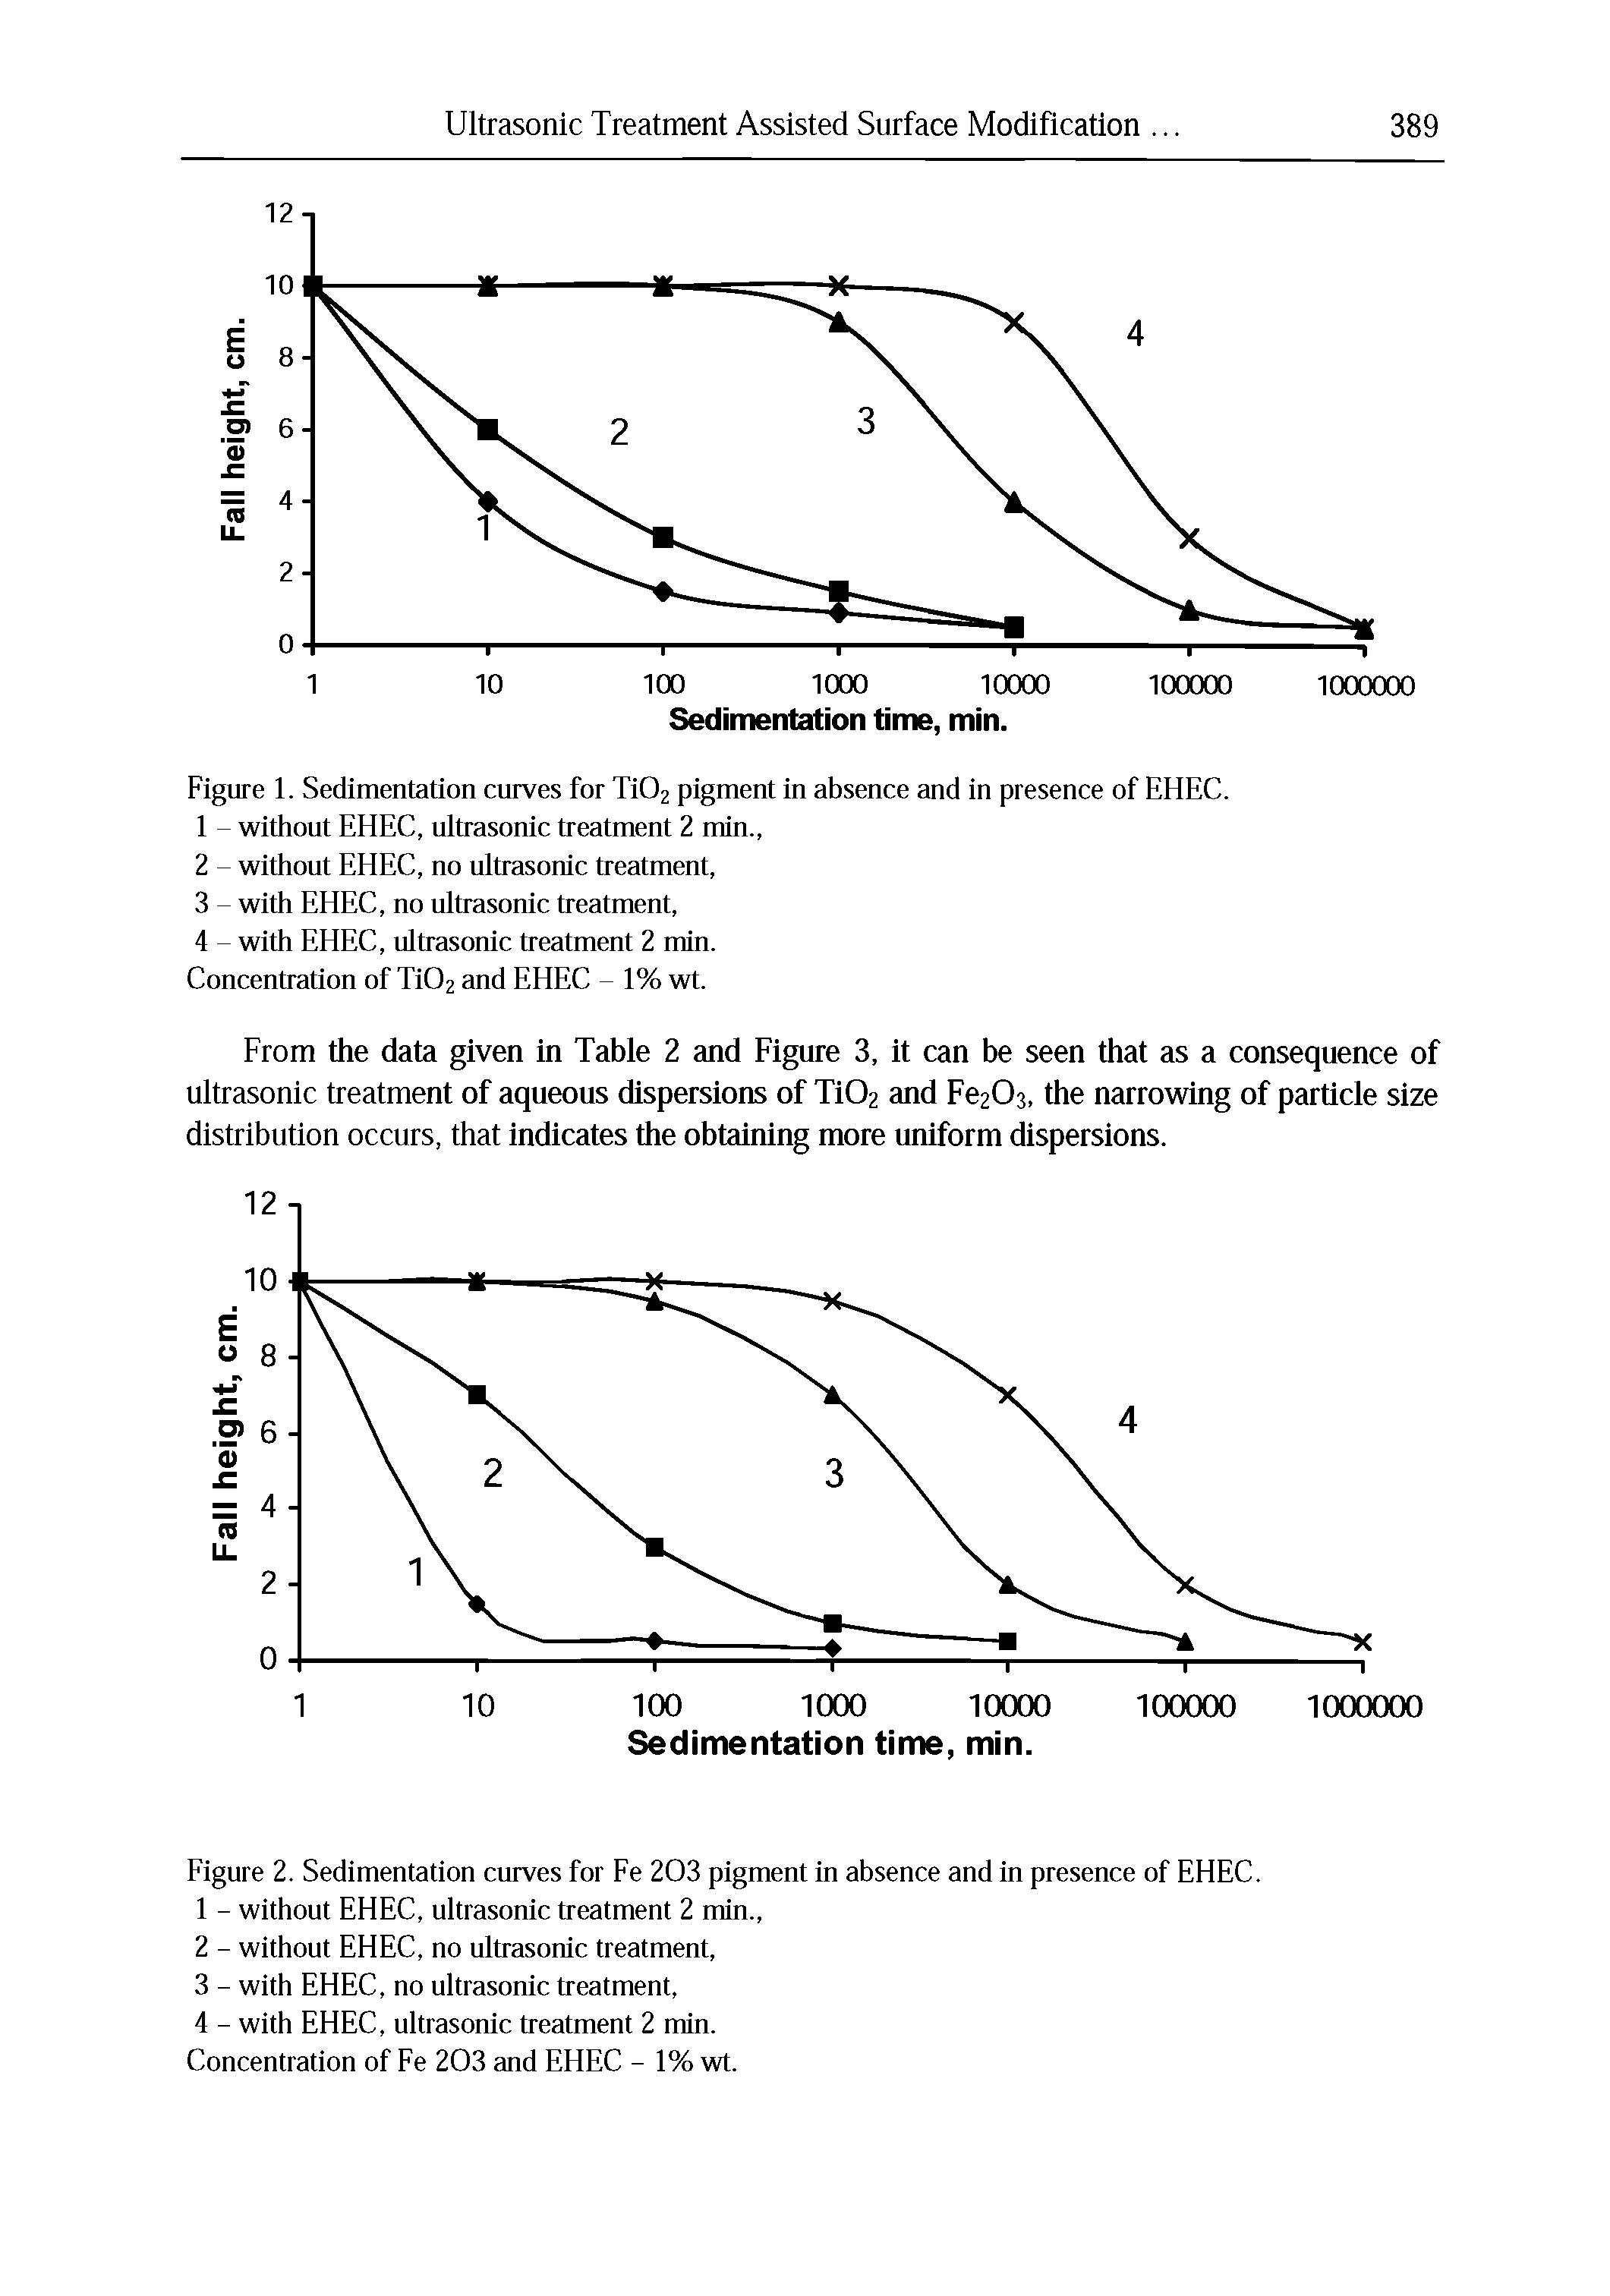 Figure 1. Sedimentation curves for Ti02 pigment in absence and in presence of EHEC.